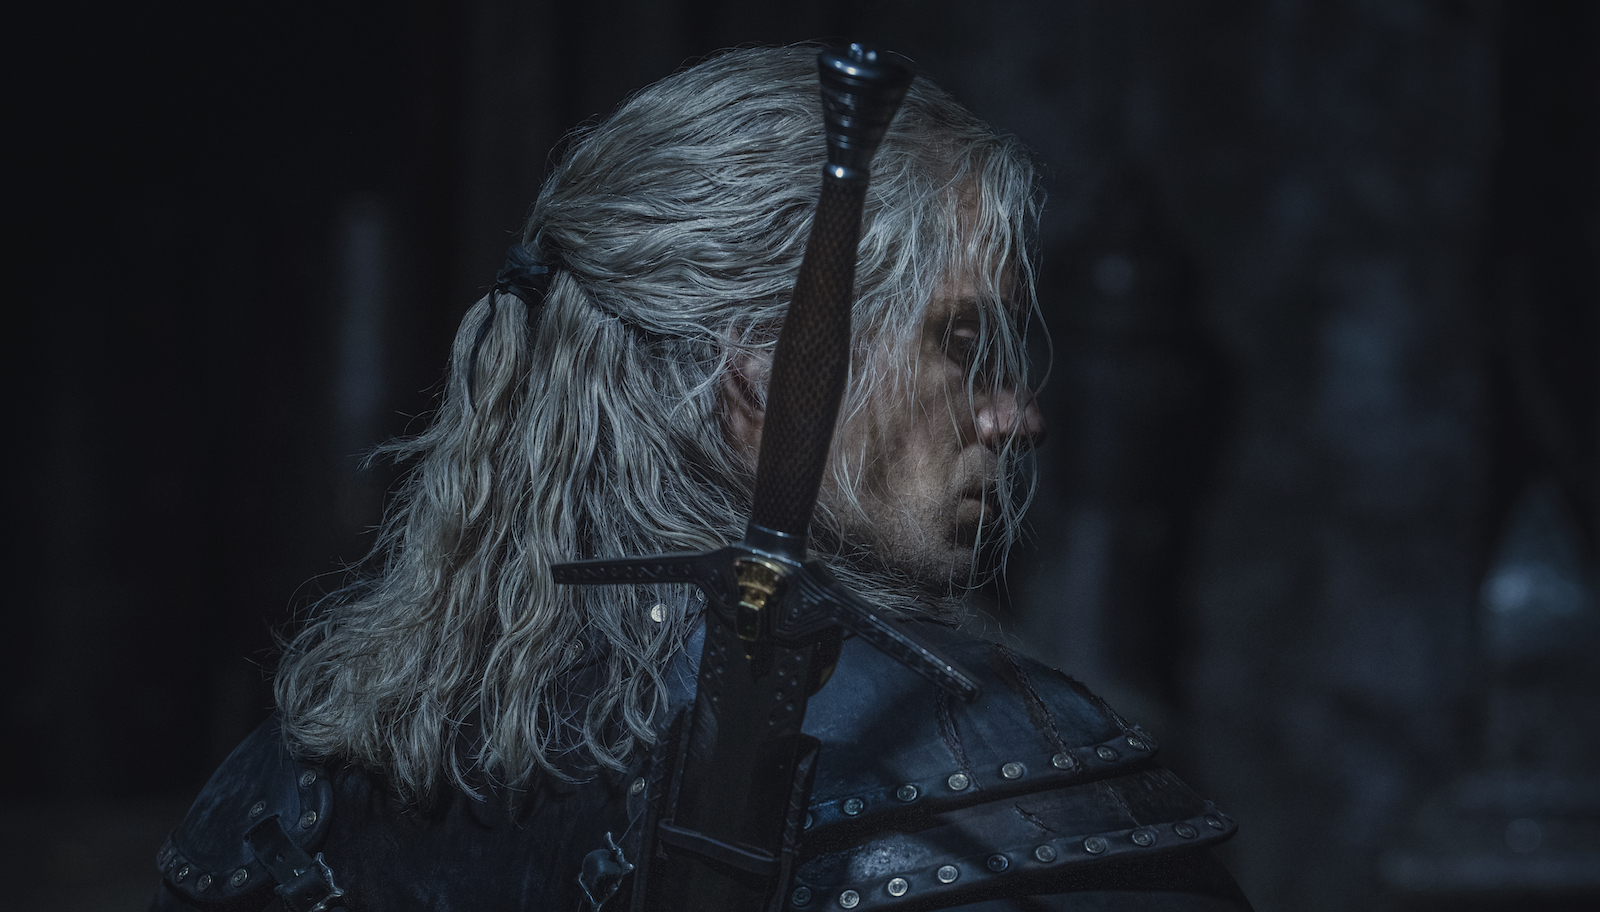 The Witcher: Blood Origin will explore pre-colonized world of elves